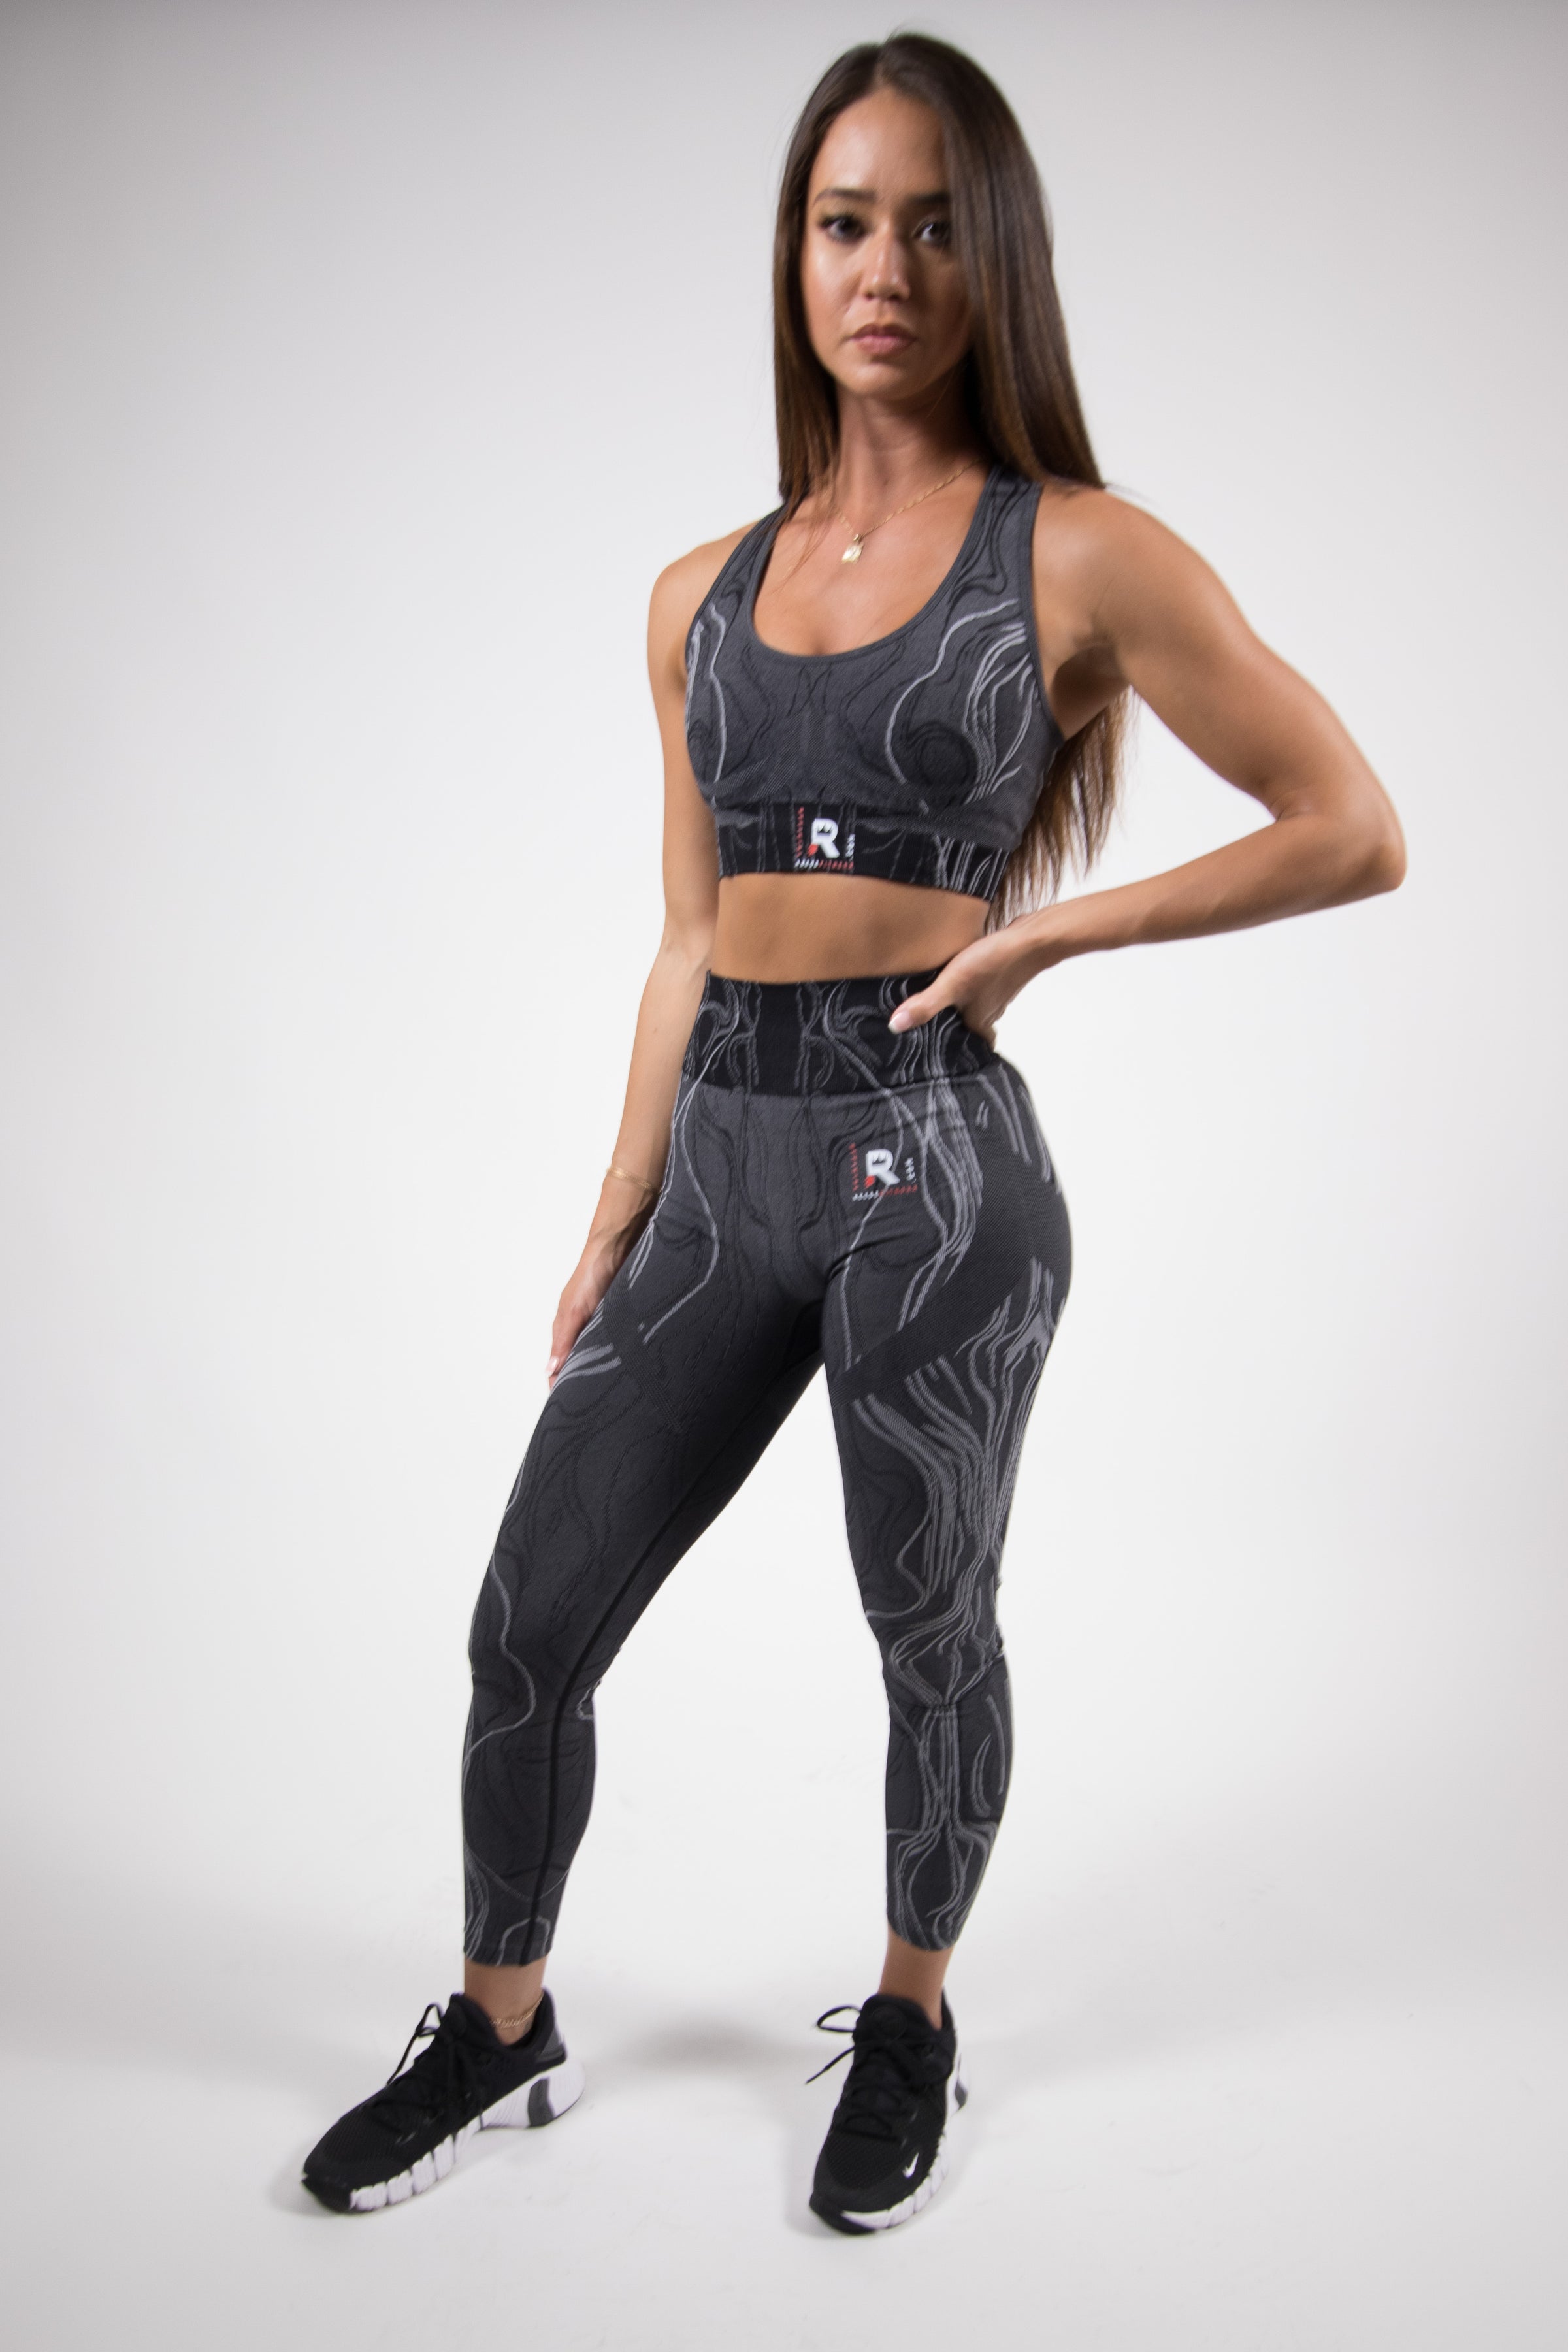 Women's collection – OfficialReeseFitness